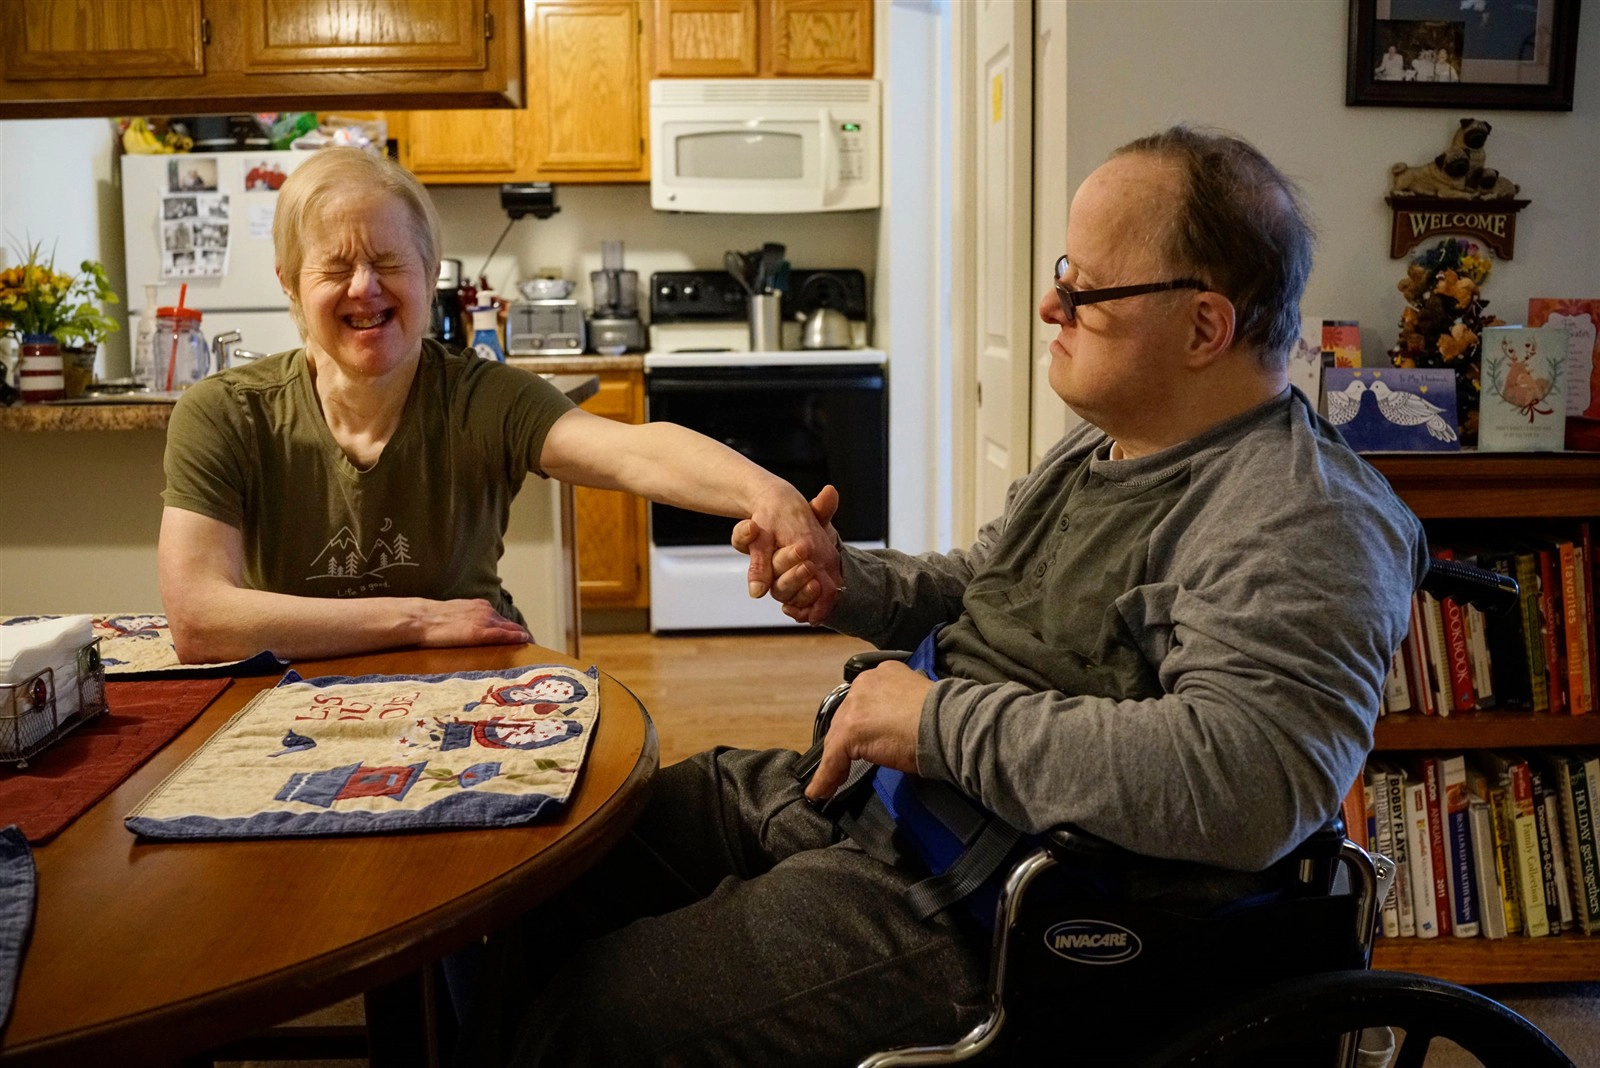 The couple with Down syndrome had been together for 25 years, only separating when their husband died 6